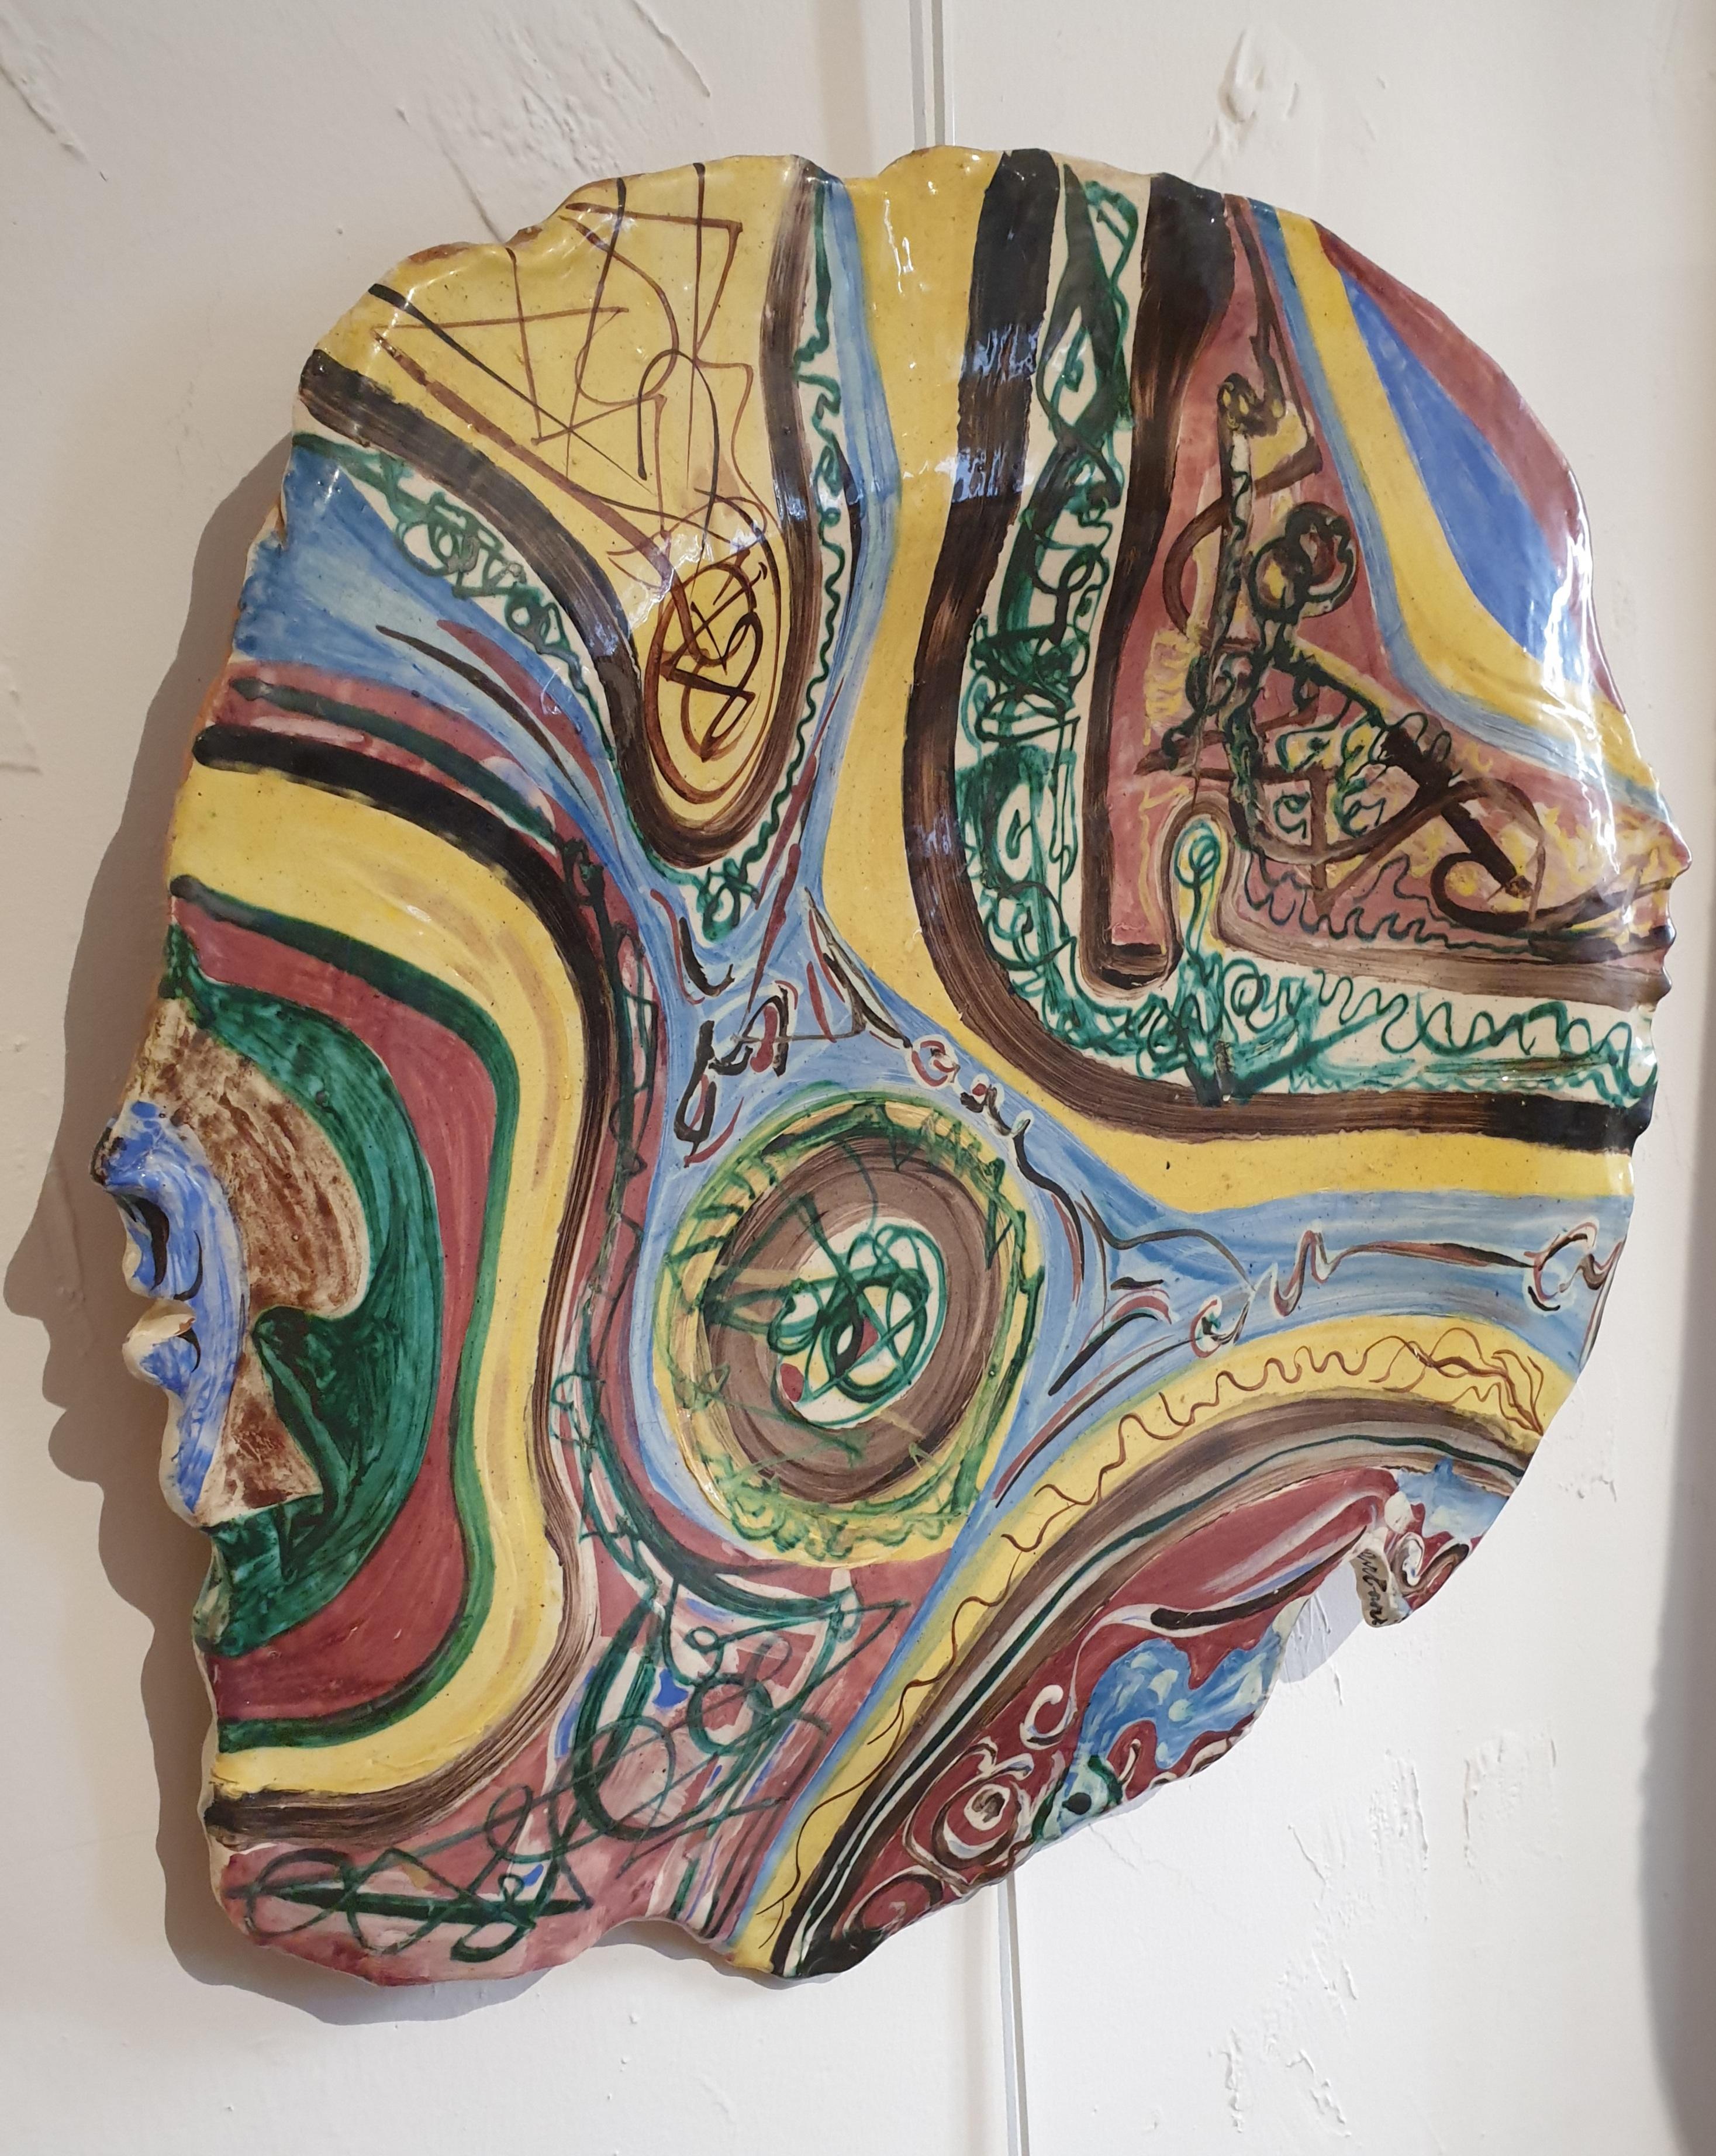 Abstract Expressionist Etruscan Inspired Decorative Ceramic. - Sculpture by Claude Urbani